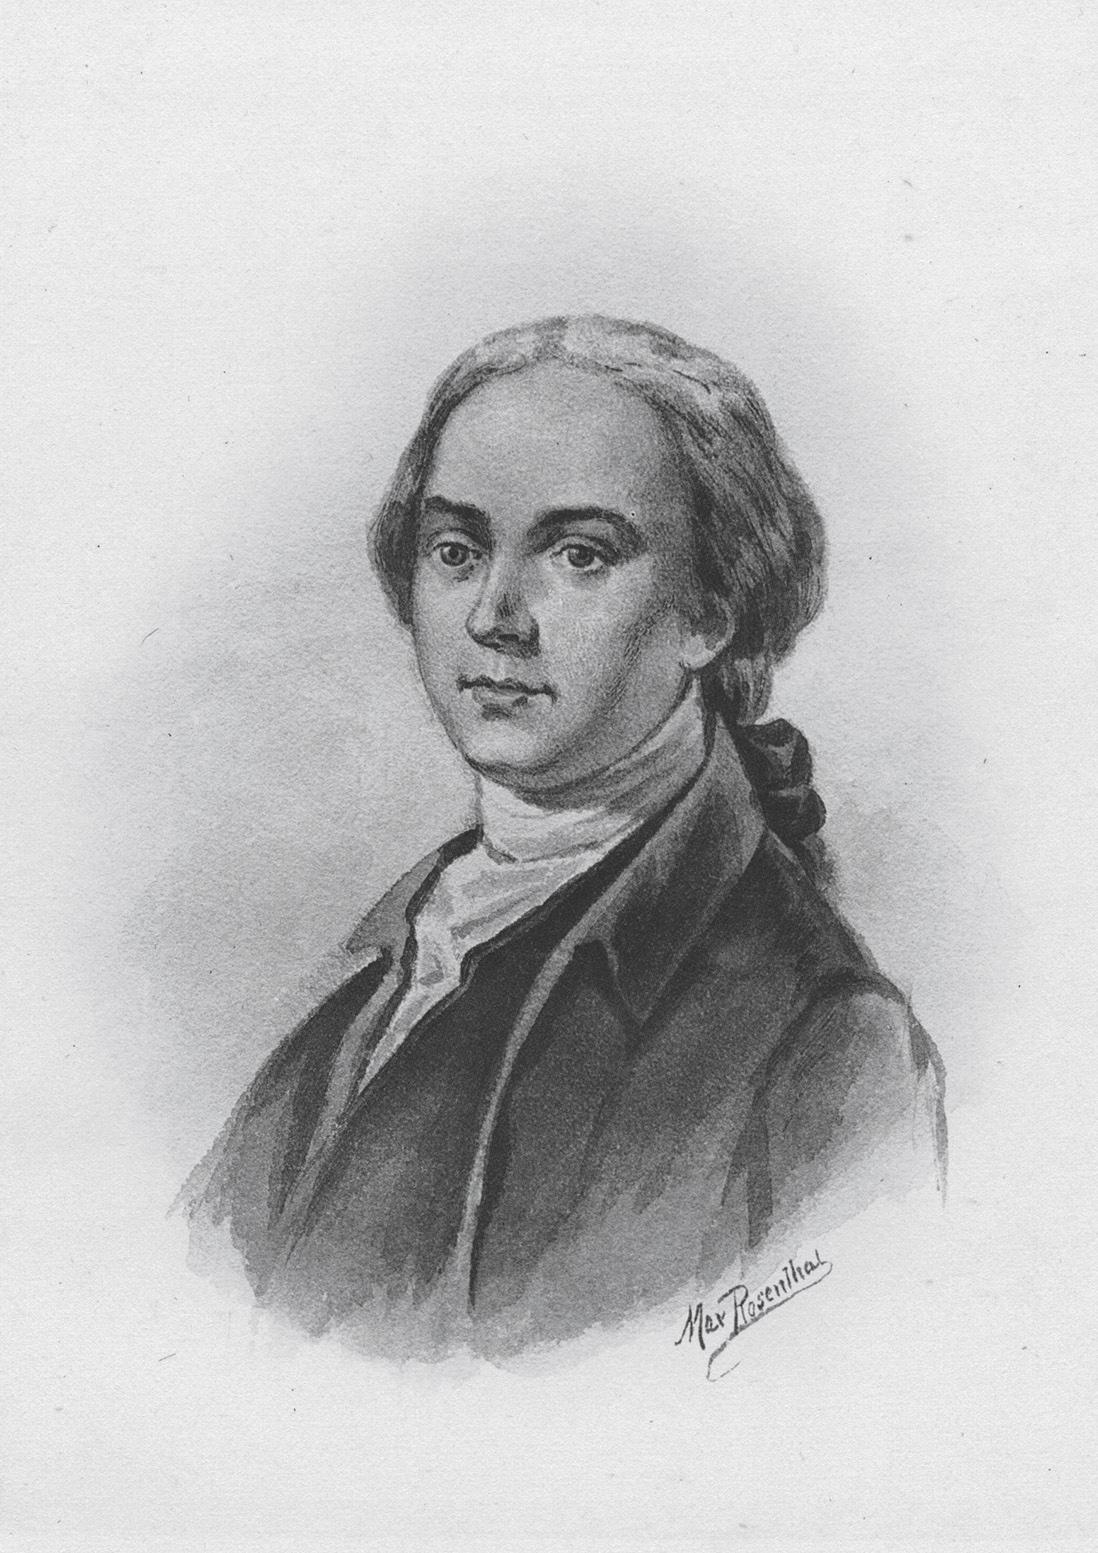 Print of Thomas Nelson Jr. by Max Rosenthal after a painting by Rembrandt Peale, 1850–1890. The New York Public Library. （Public Domain）